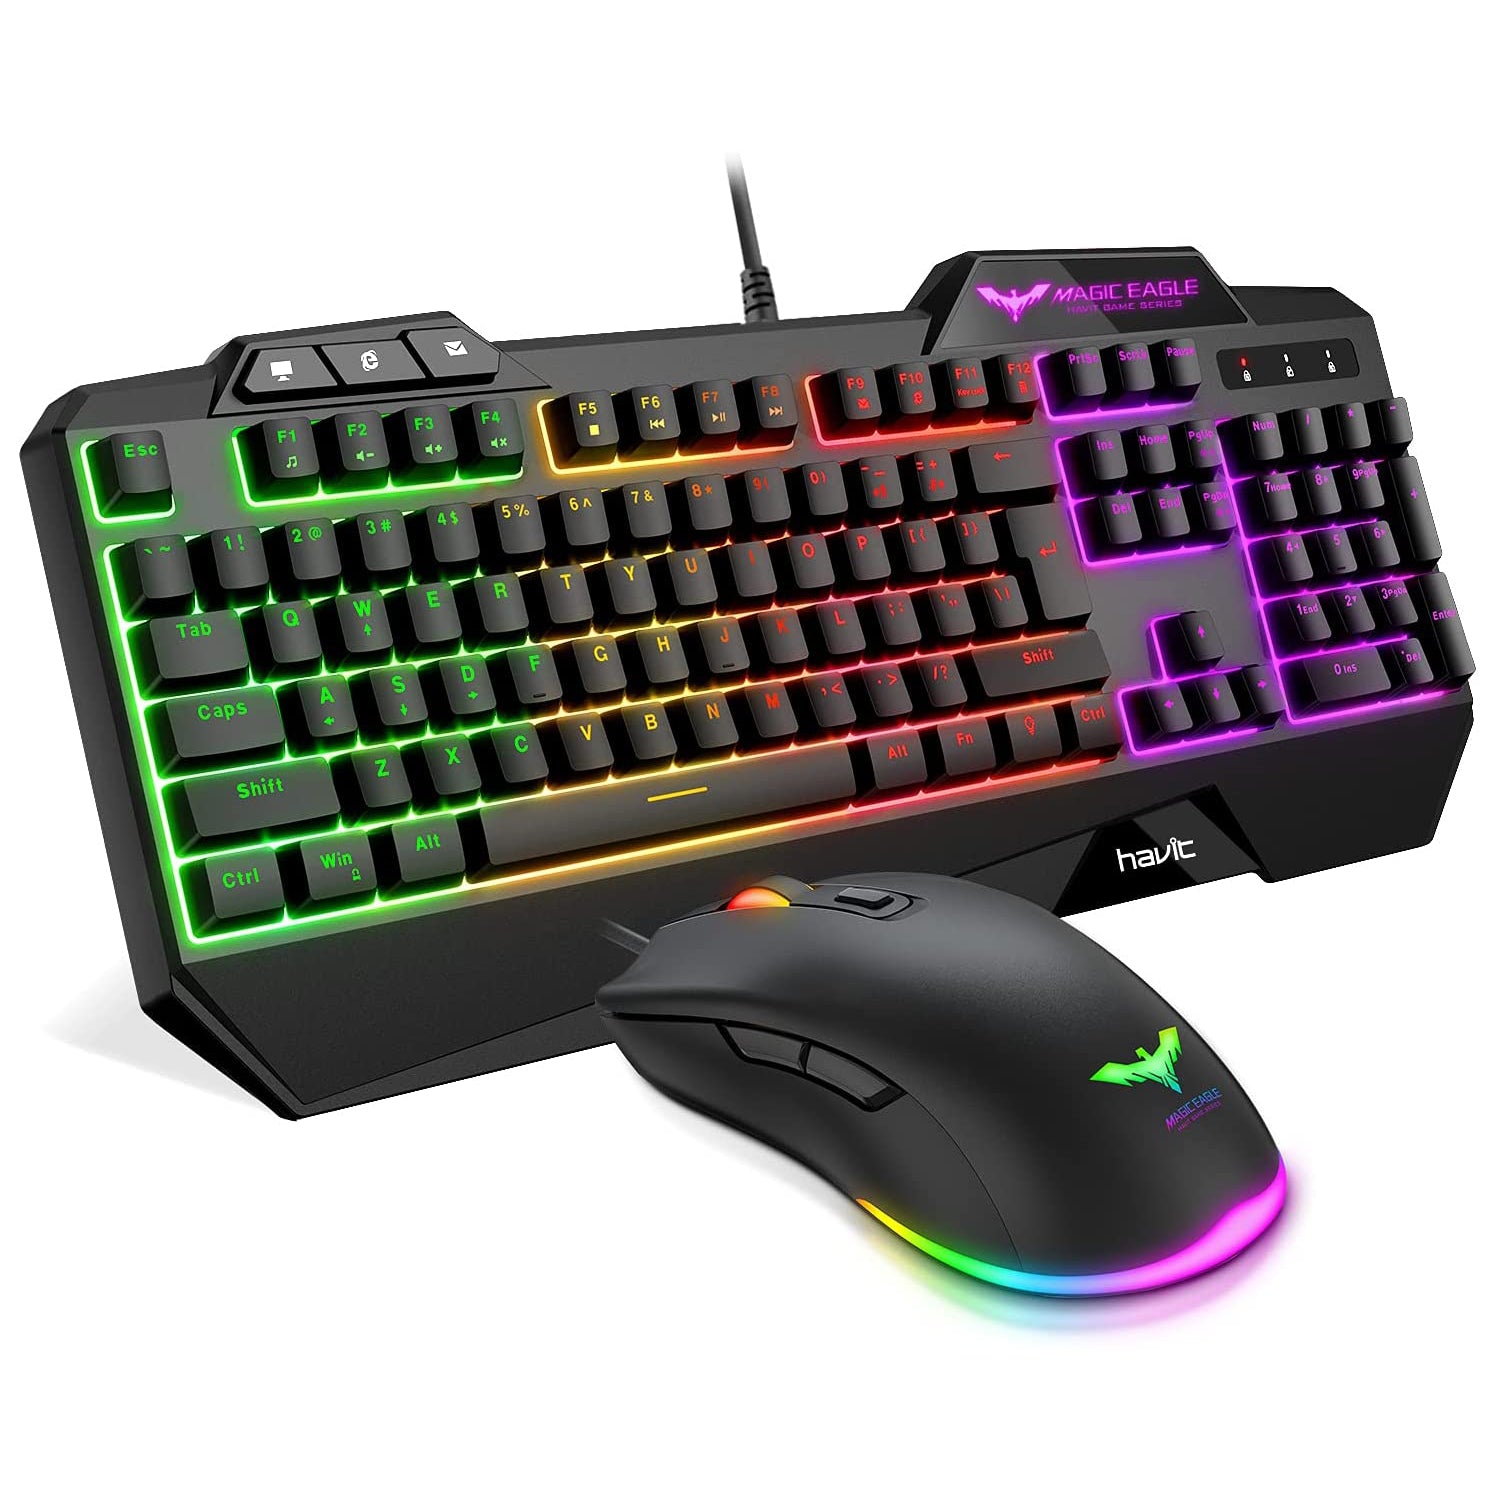 HAVIT KB392L Gaming Keyboard + Mouse + Mouse Pad + Headset Combo